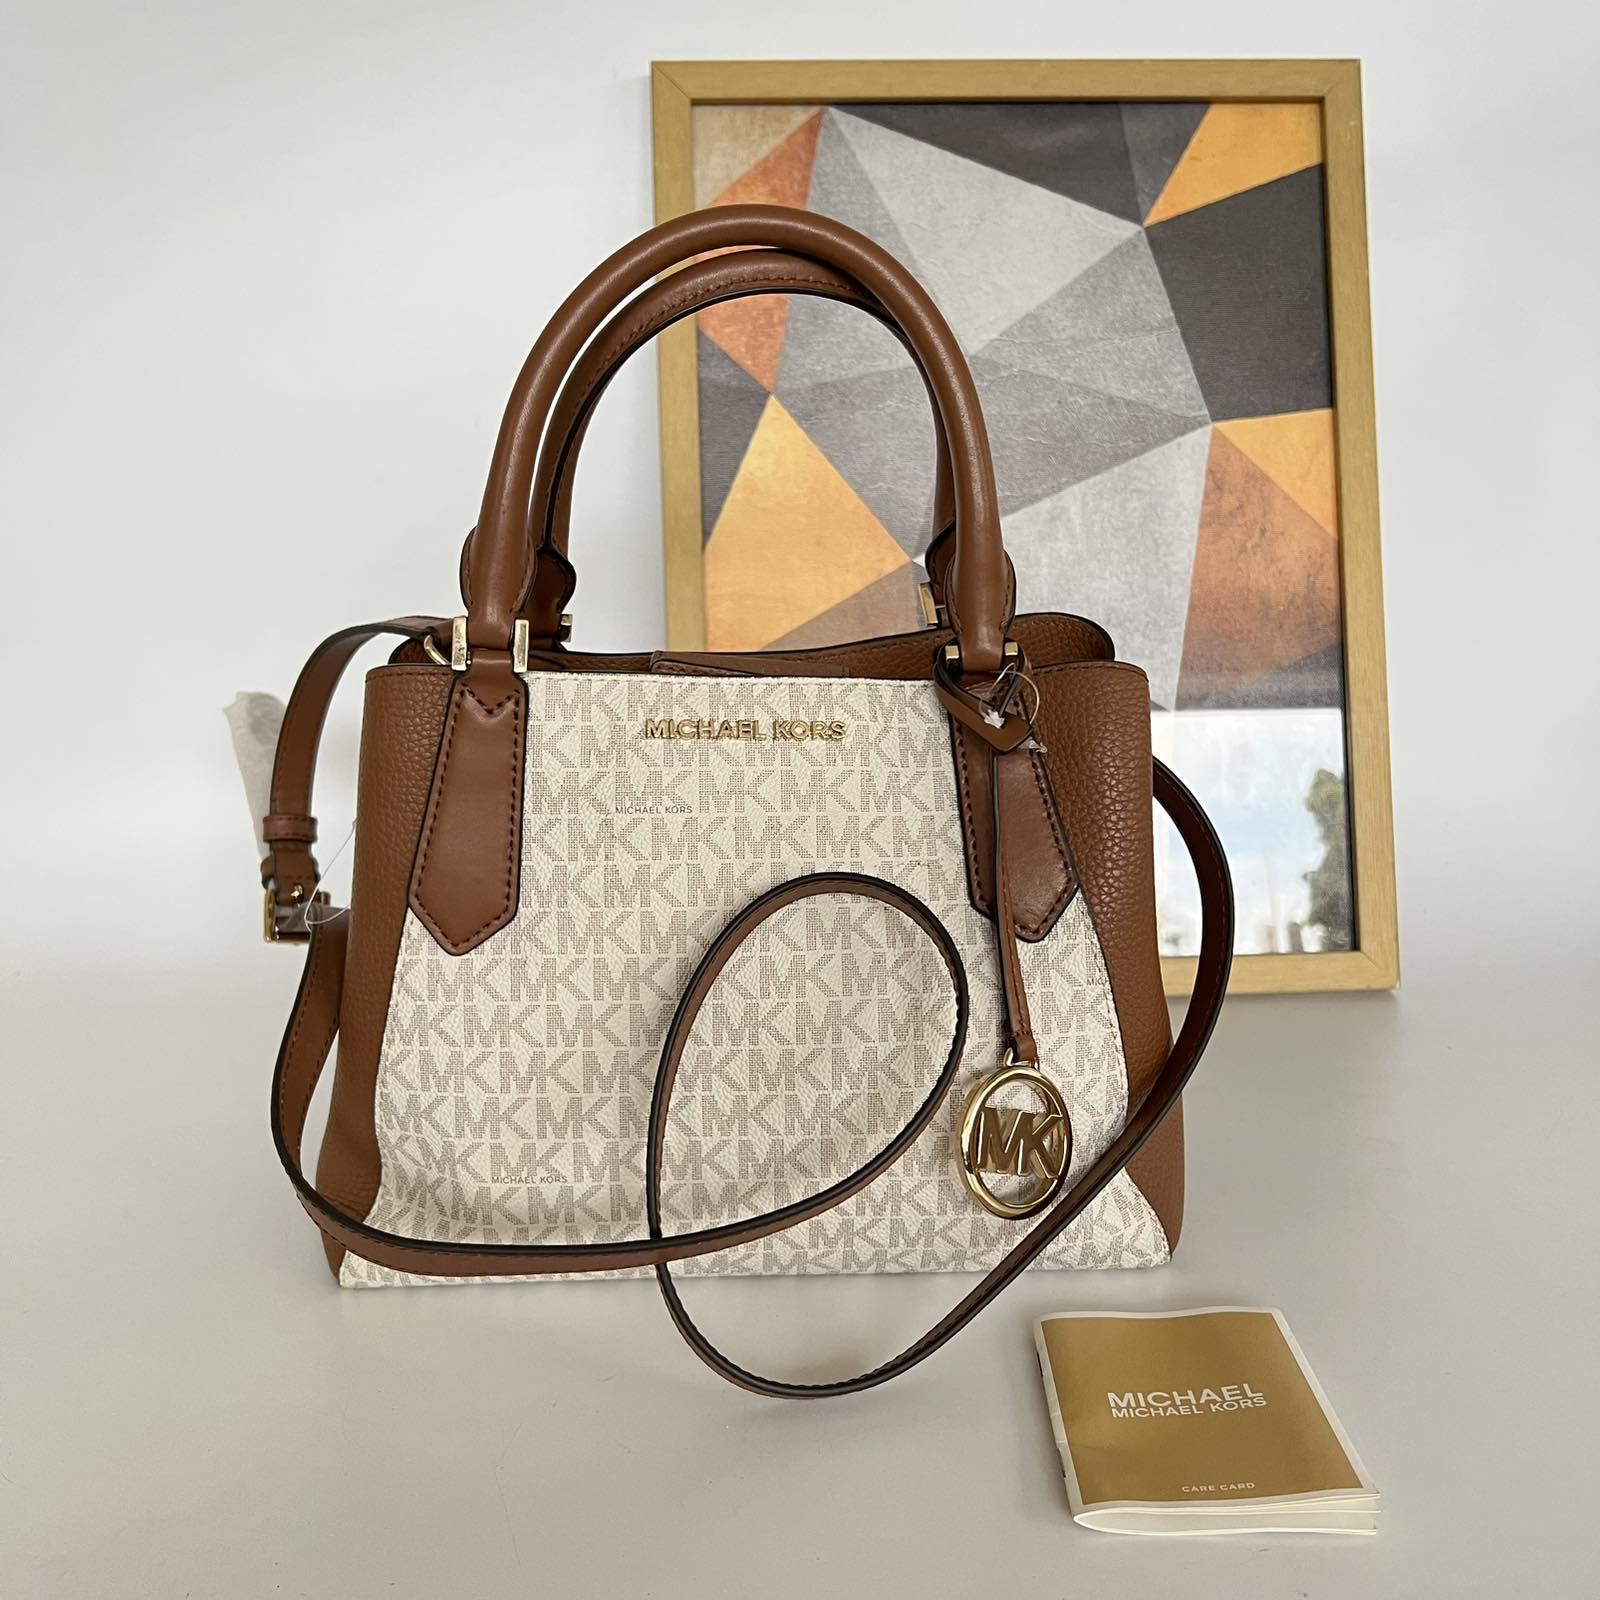 Michael Kors Kimberly Vanilla/Tan Leather Two Way Bag. With long strap &  care card ❤️